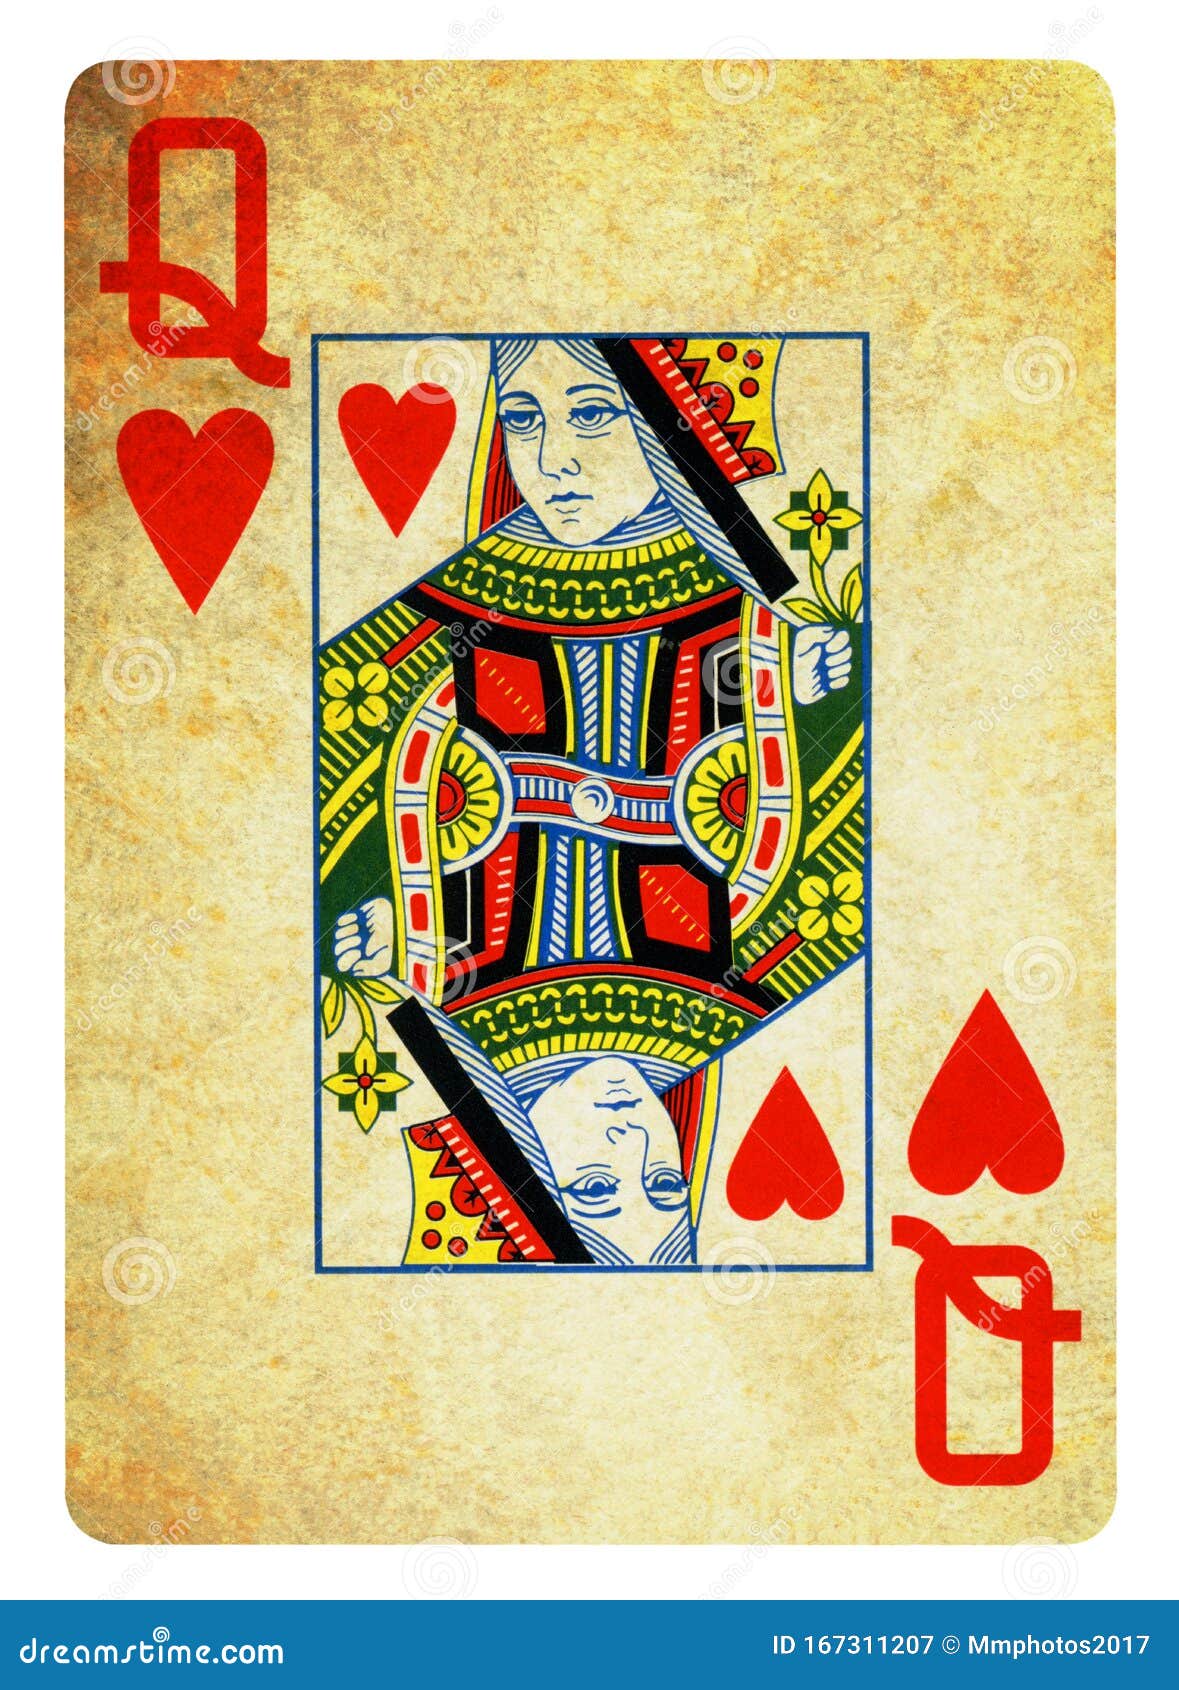 Hearts Suit Vintage Playing Cards - Isolated on White Stock Image ...